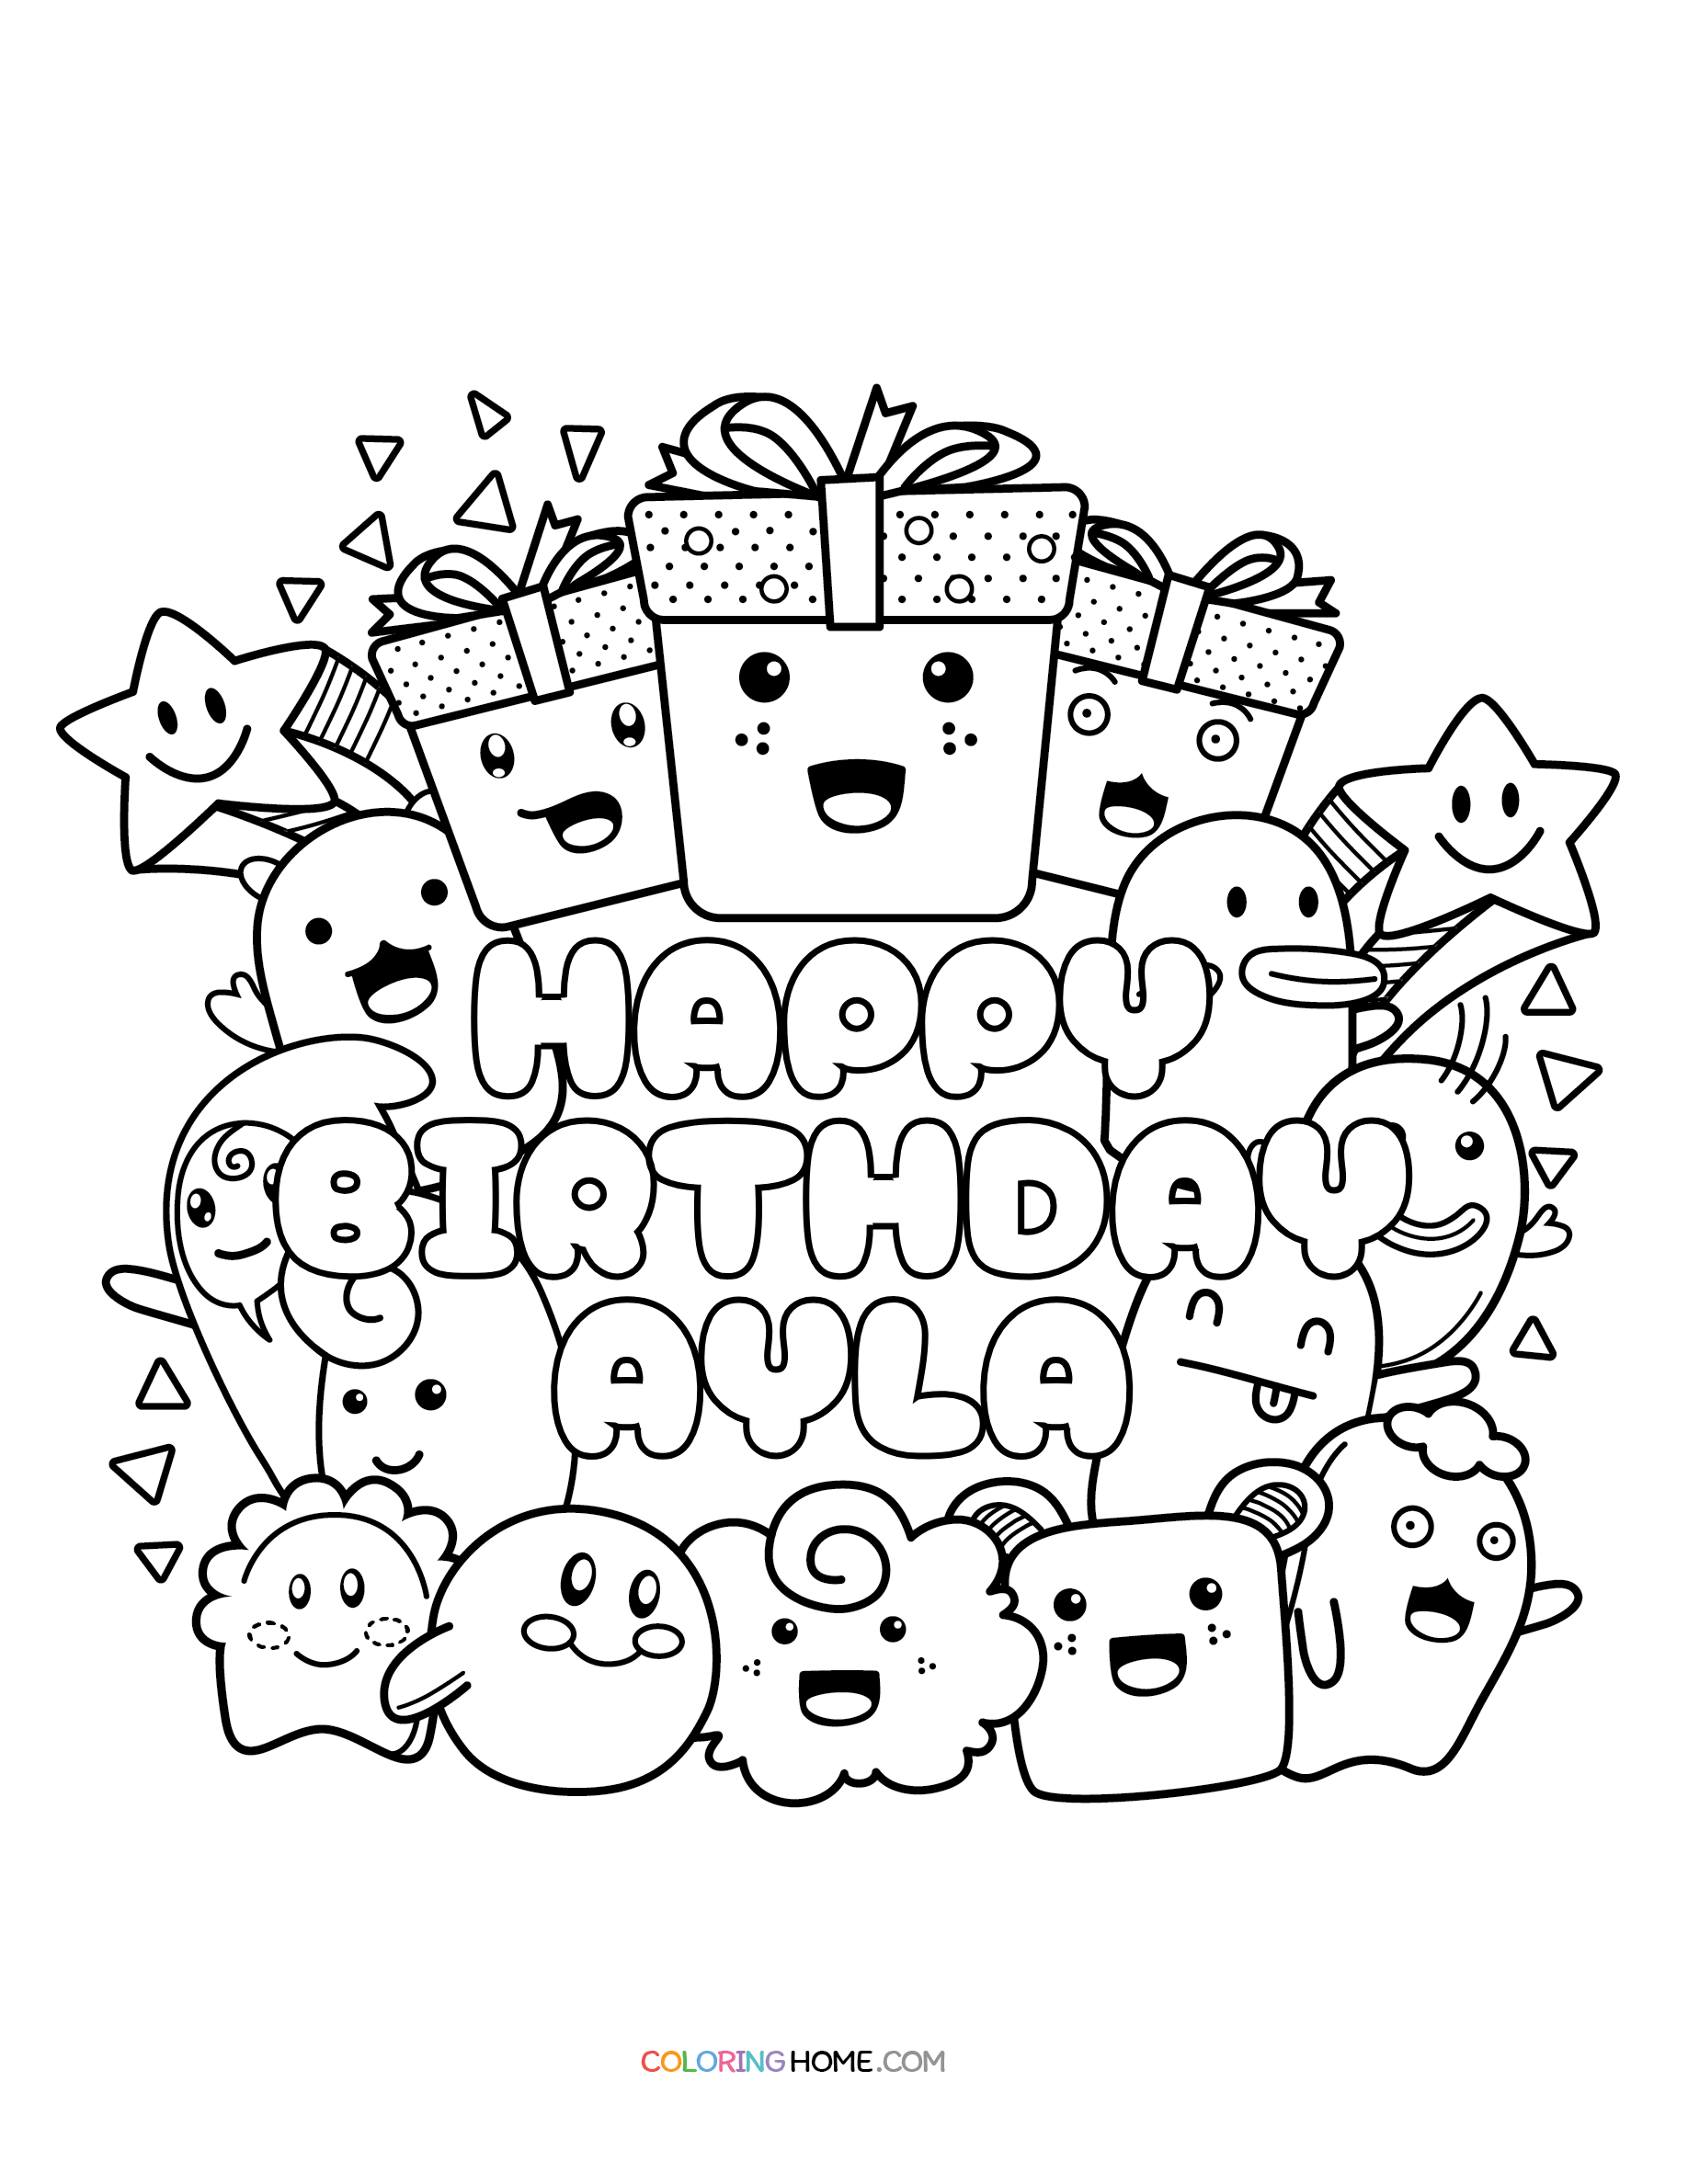 Happy Birthday Ayla coloring page